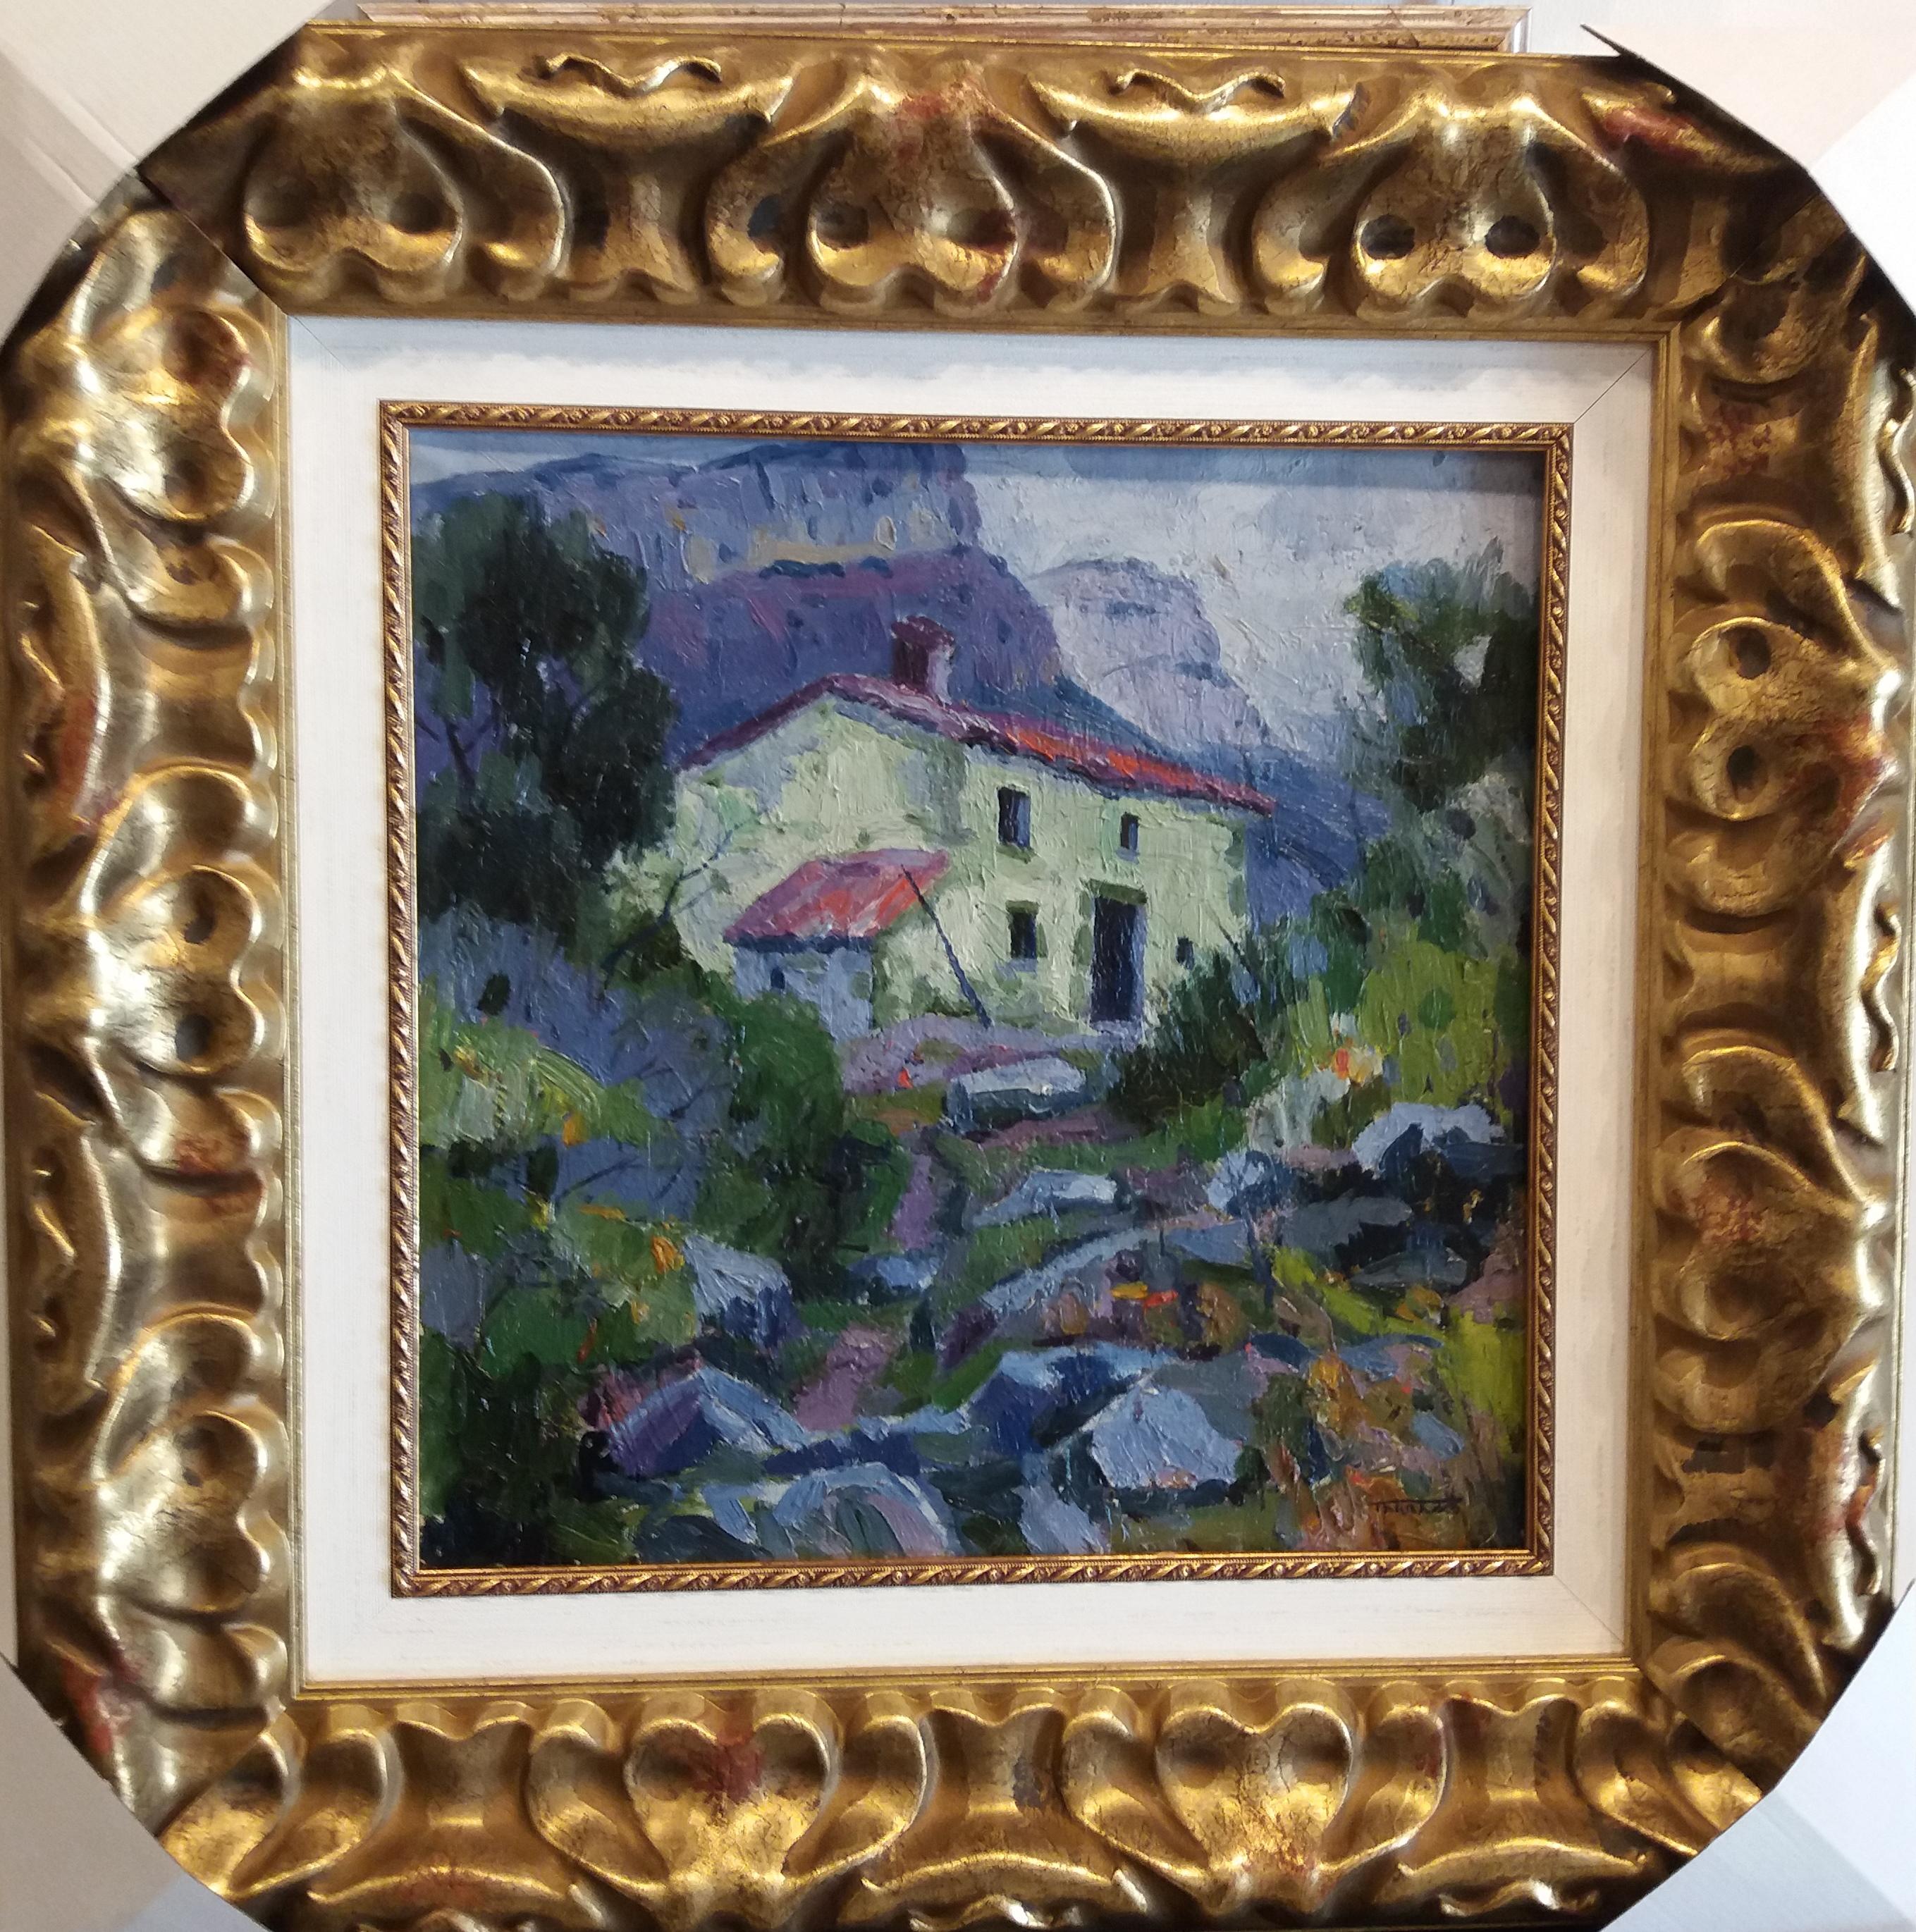 Tarrasso. small square. House in the countryside. Original acrylic painting - Painting by TARRASSO, Casimiro